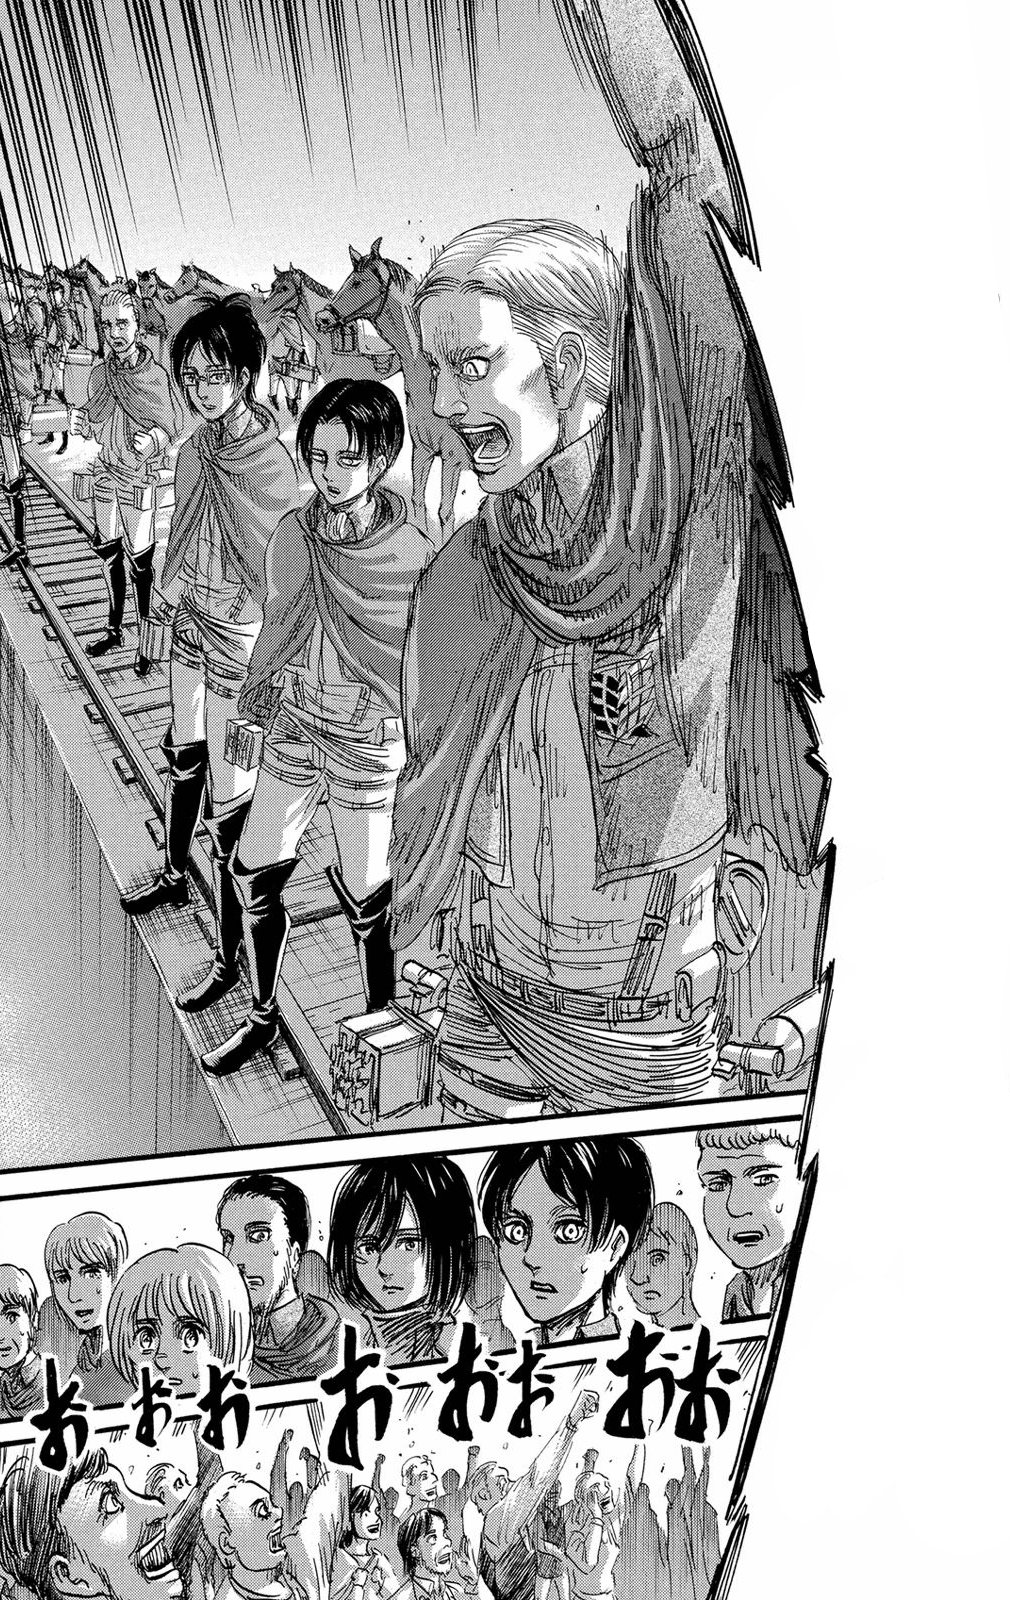 Attack on Titan Manga Editor Is Teasing Something New Related To The Series